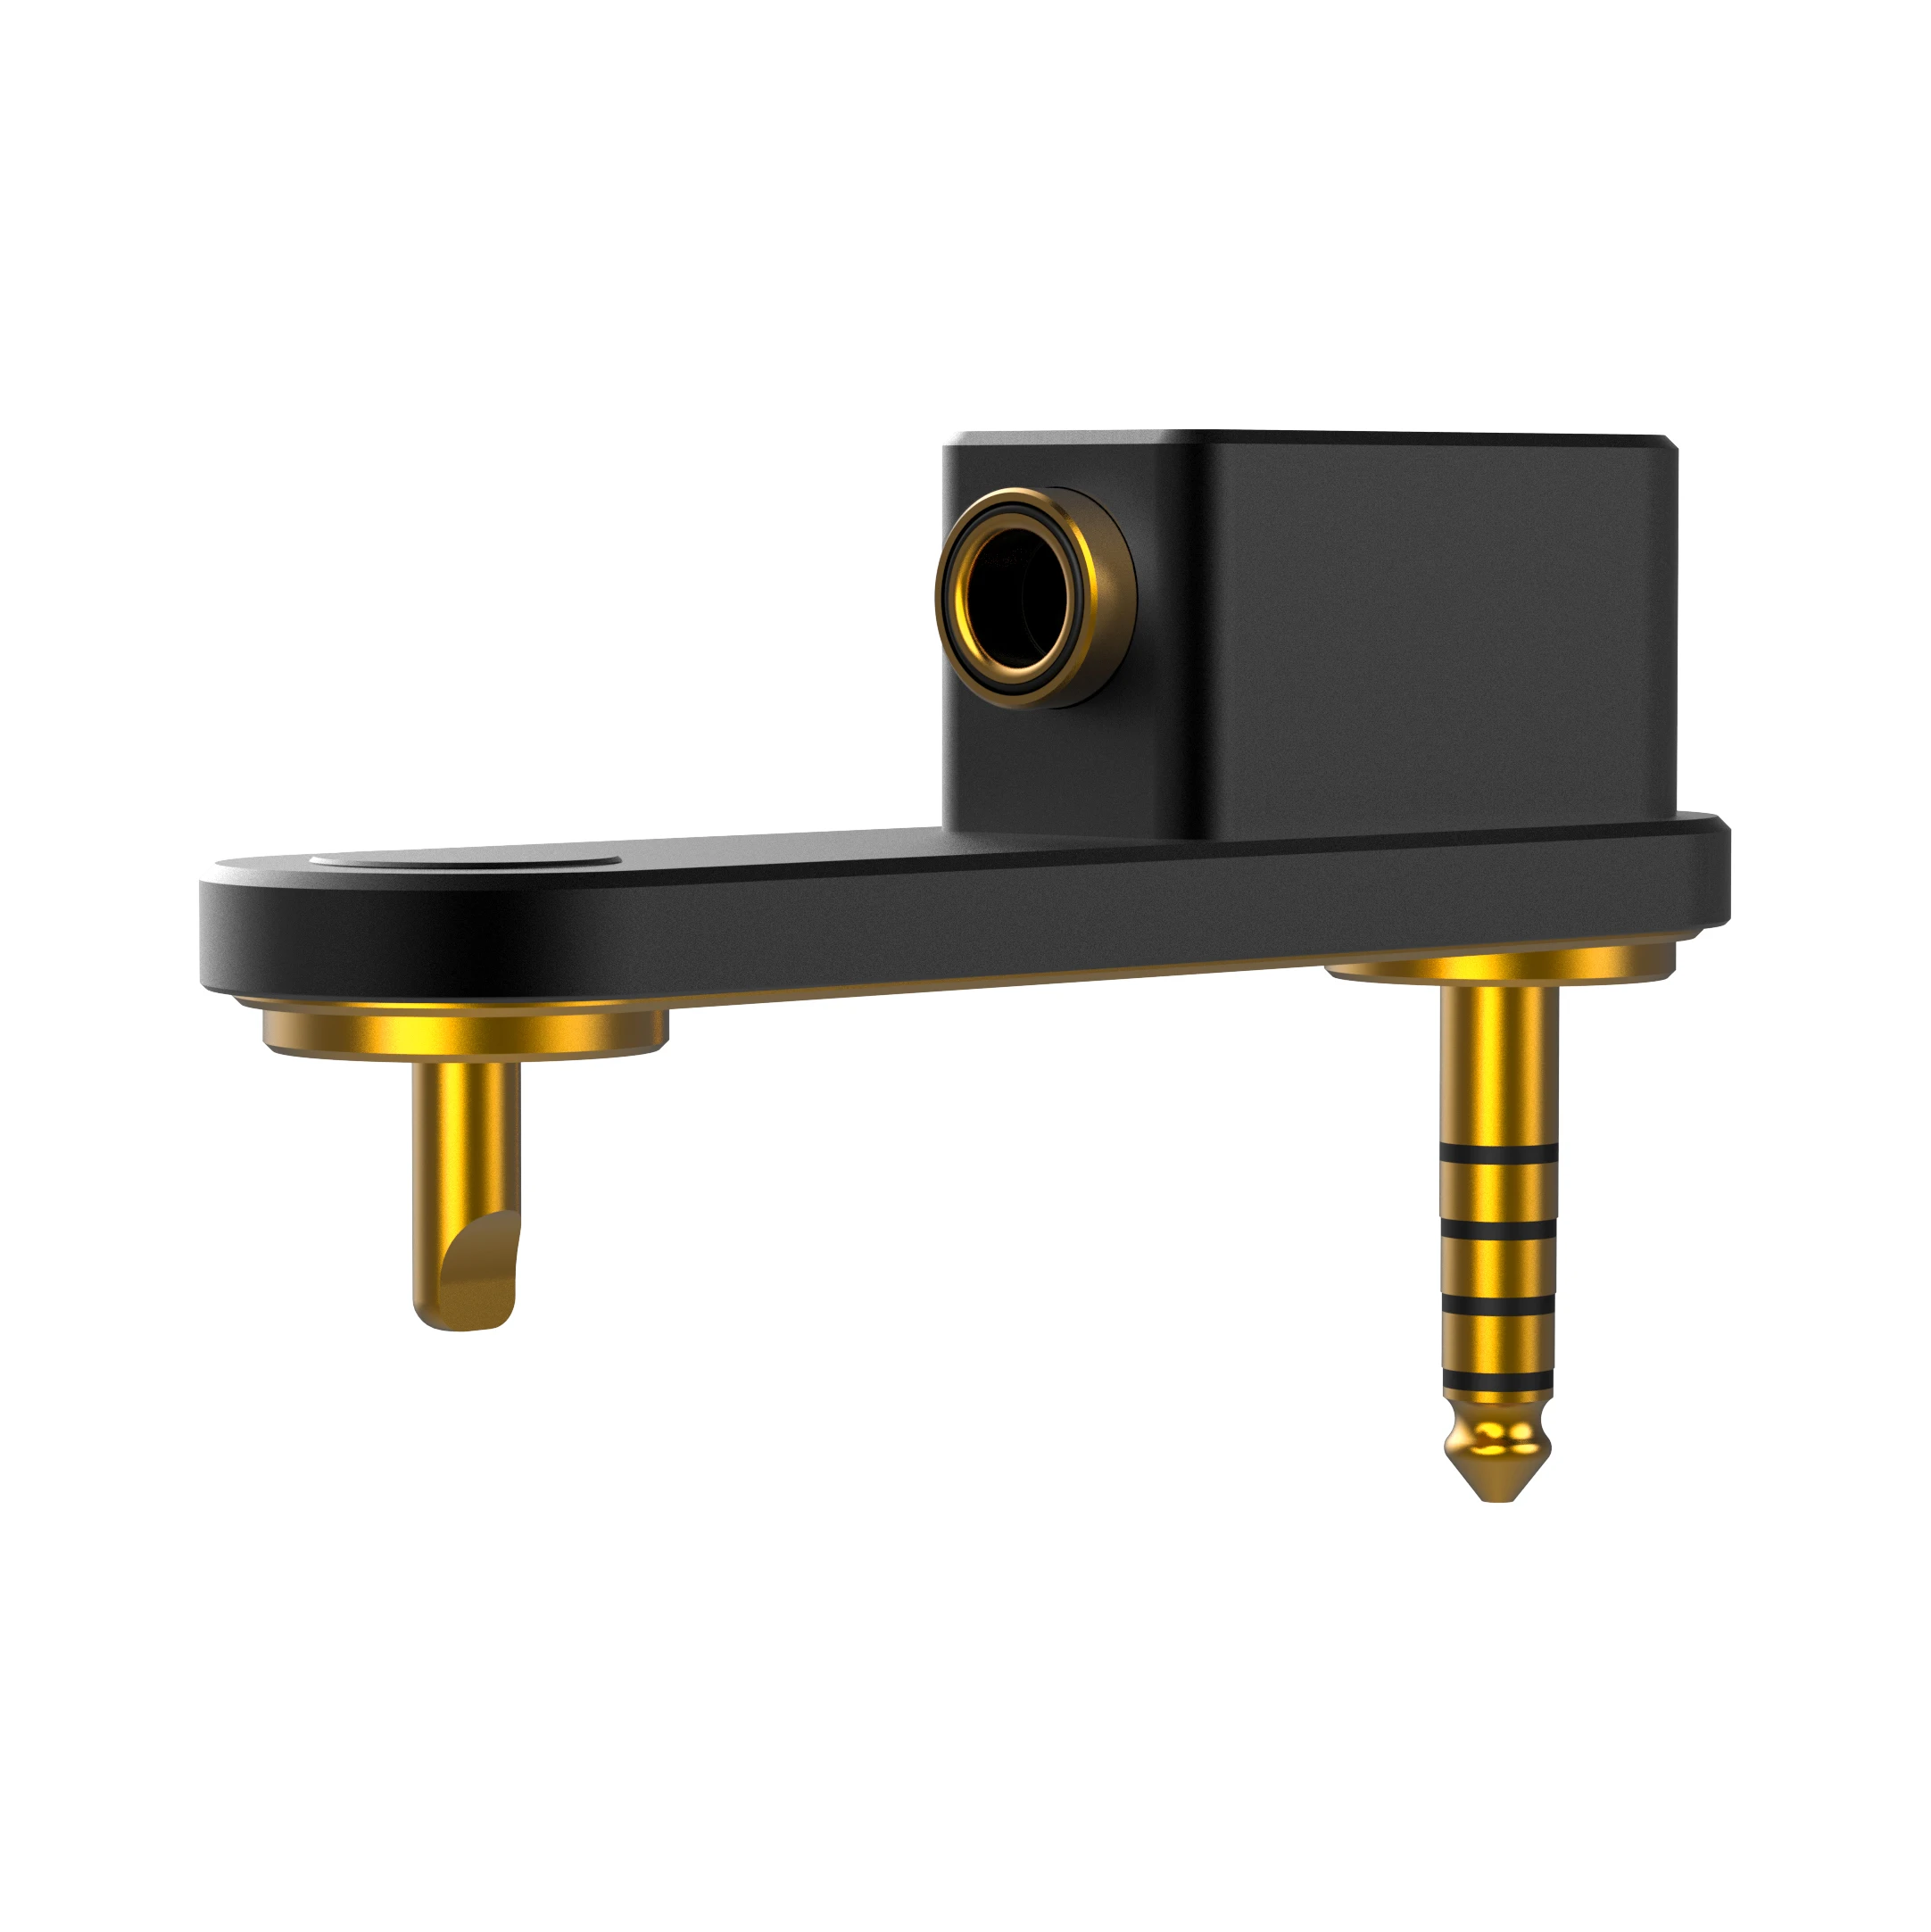 DD ddHiFi DJ44S M1 Ground Pin Adatper, Designed Exclusively for SONY’s  NW-WM1A and NW-WM1Z Premium Music Players